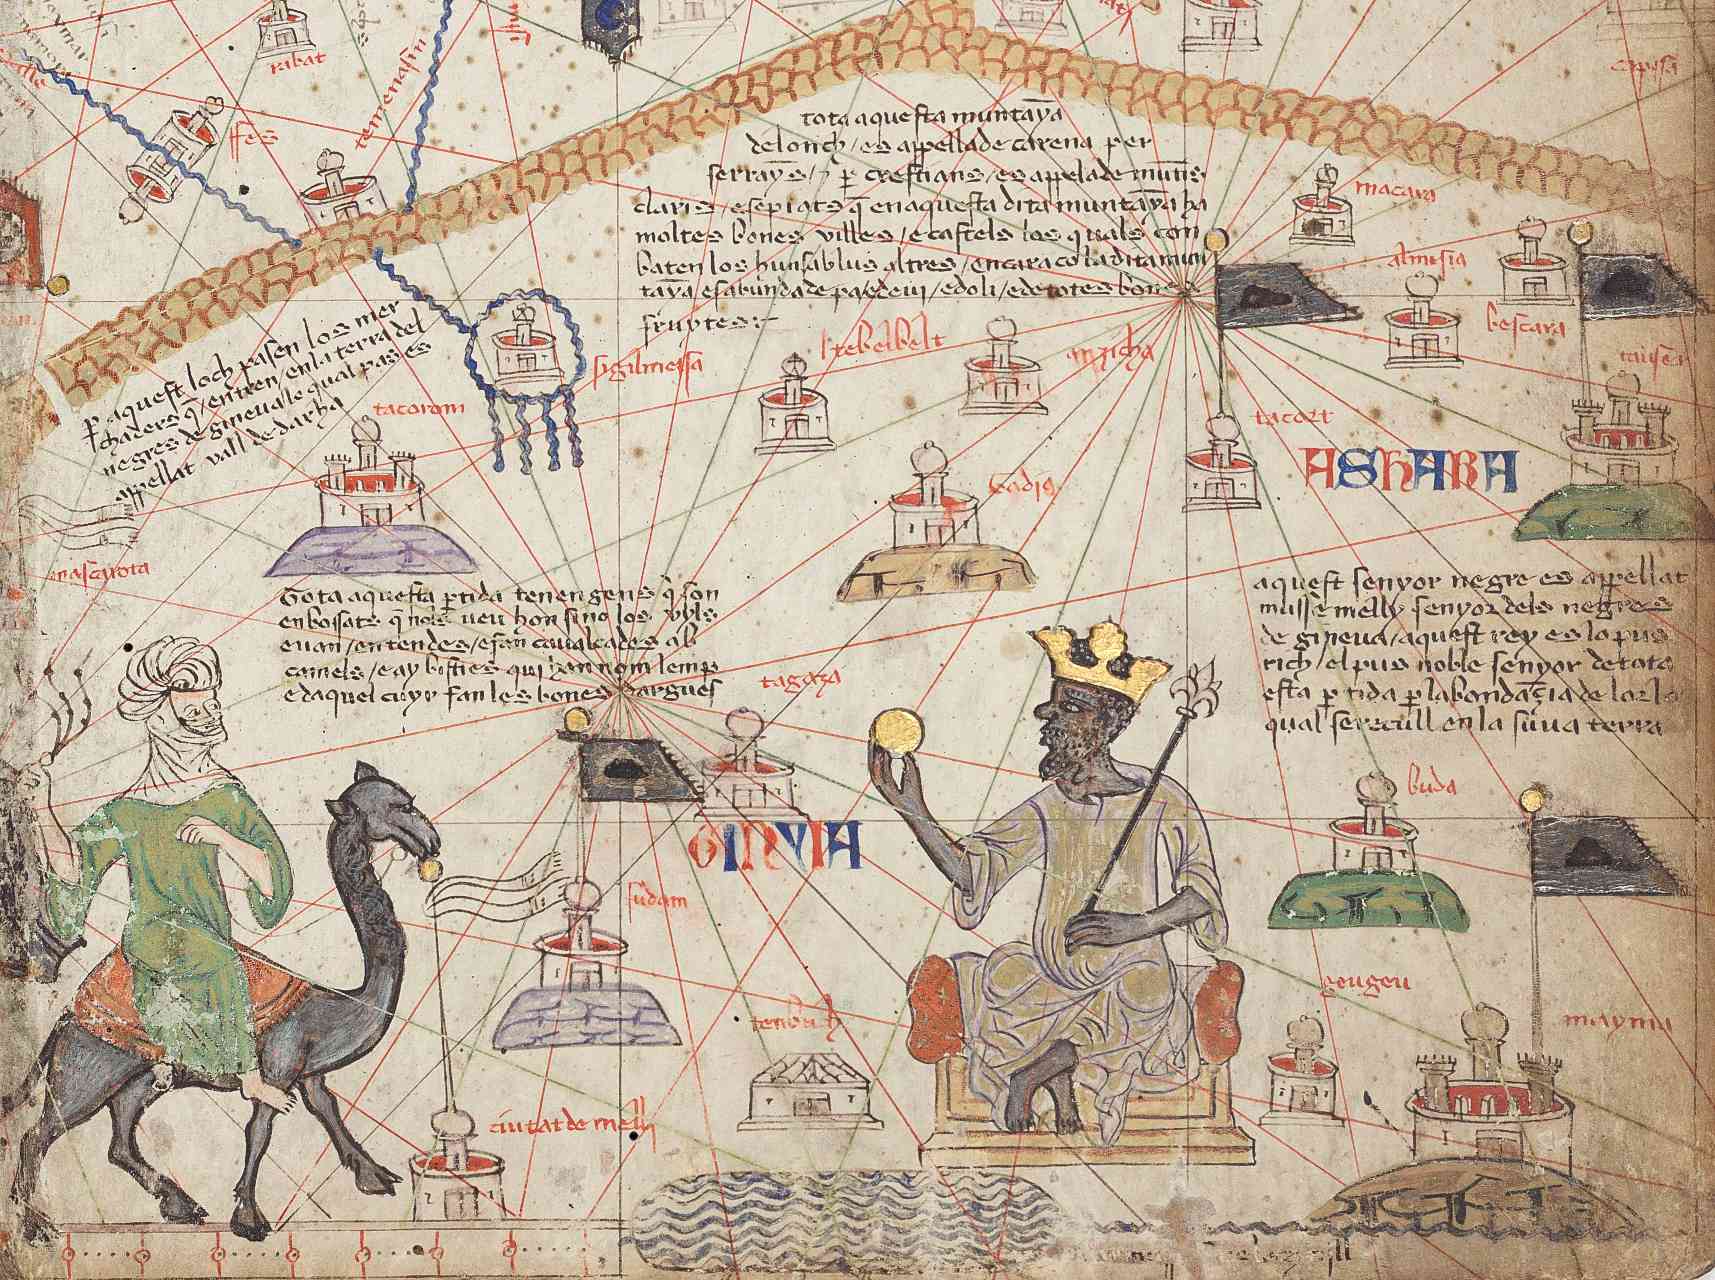 Detail from the Catalan Atlas Sheet 6 showing the Western Sahara. The Atlas Mountains are at the top and the River Niger at the bottom. Mansa Musa is shown sitting on a throne and holding a gold coin.